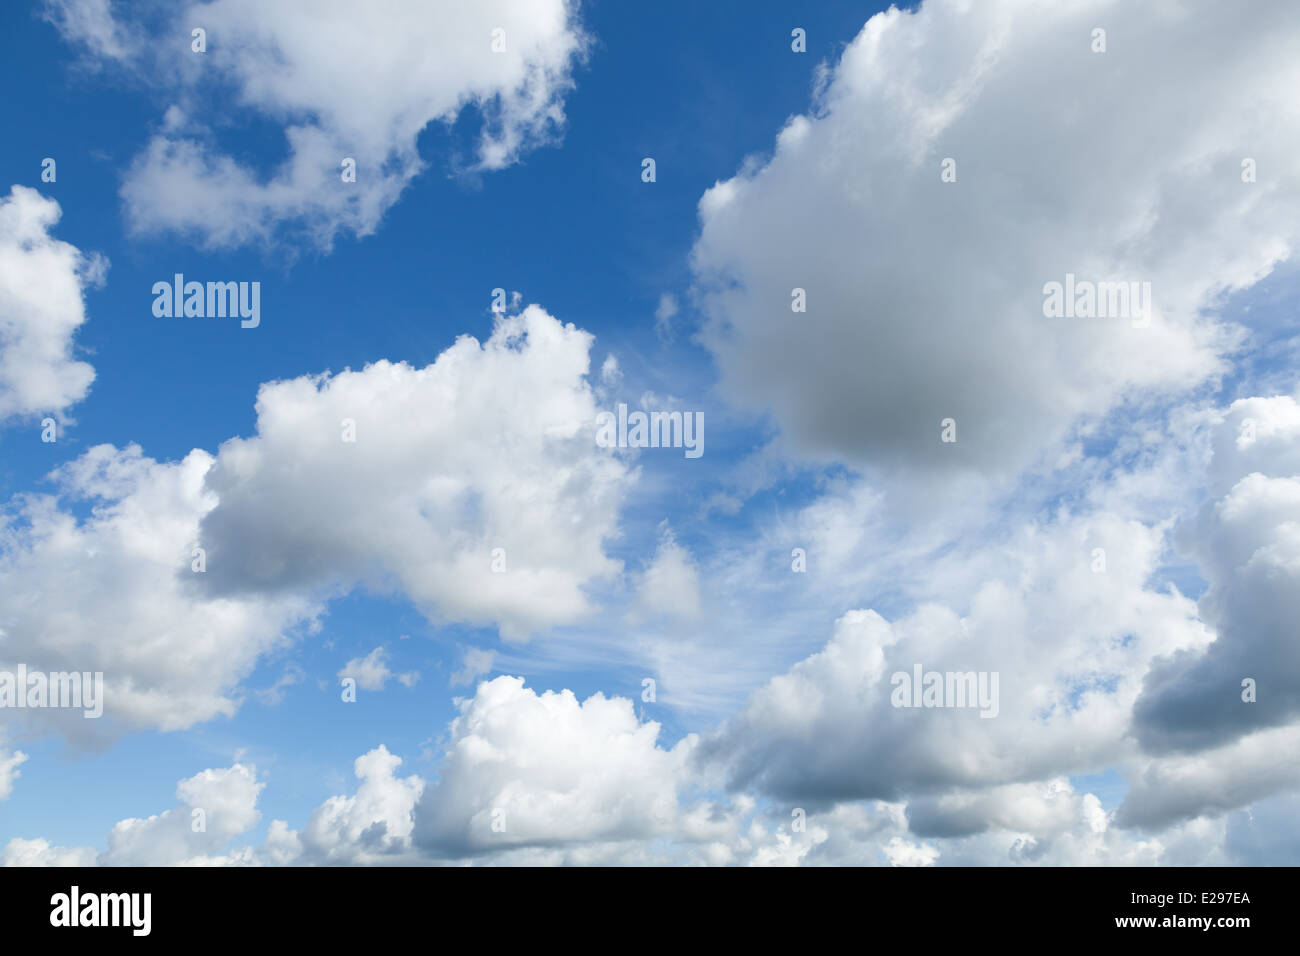 Bright blue sky background with white clouds Stock Photo